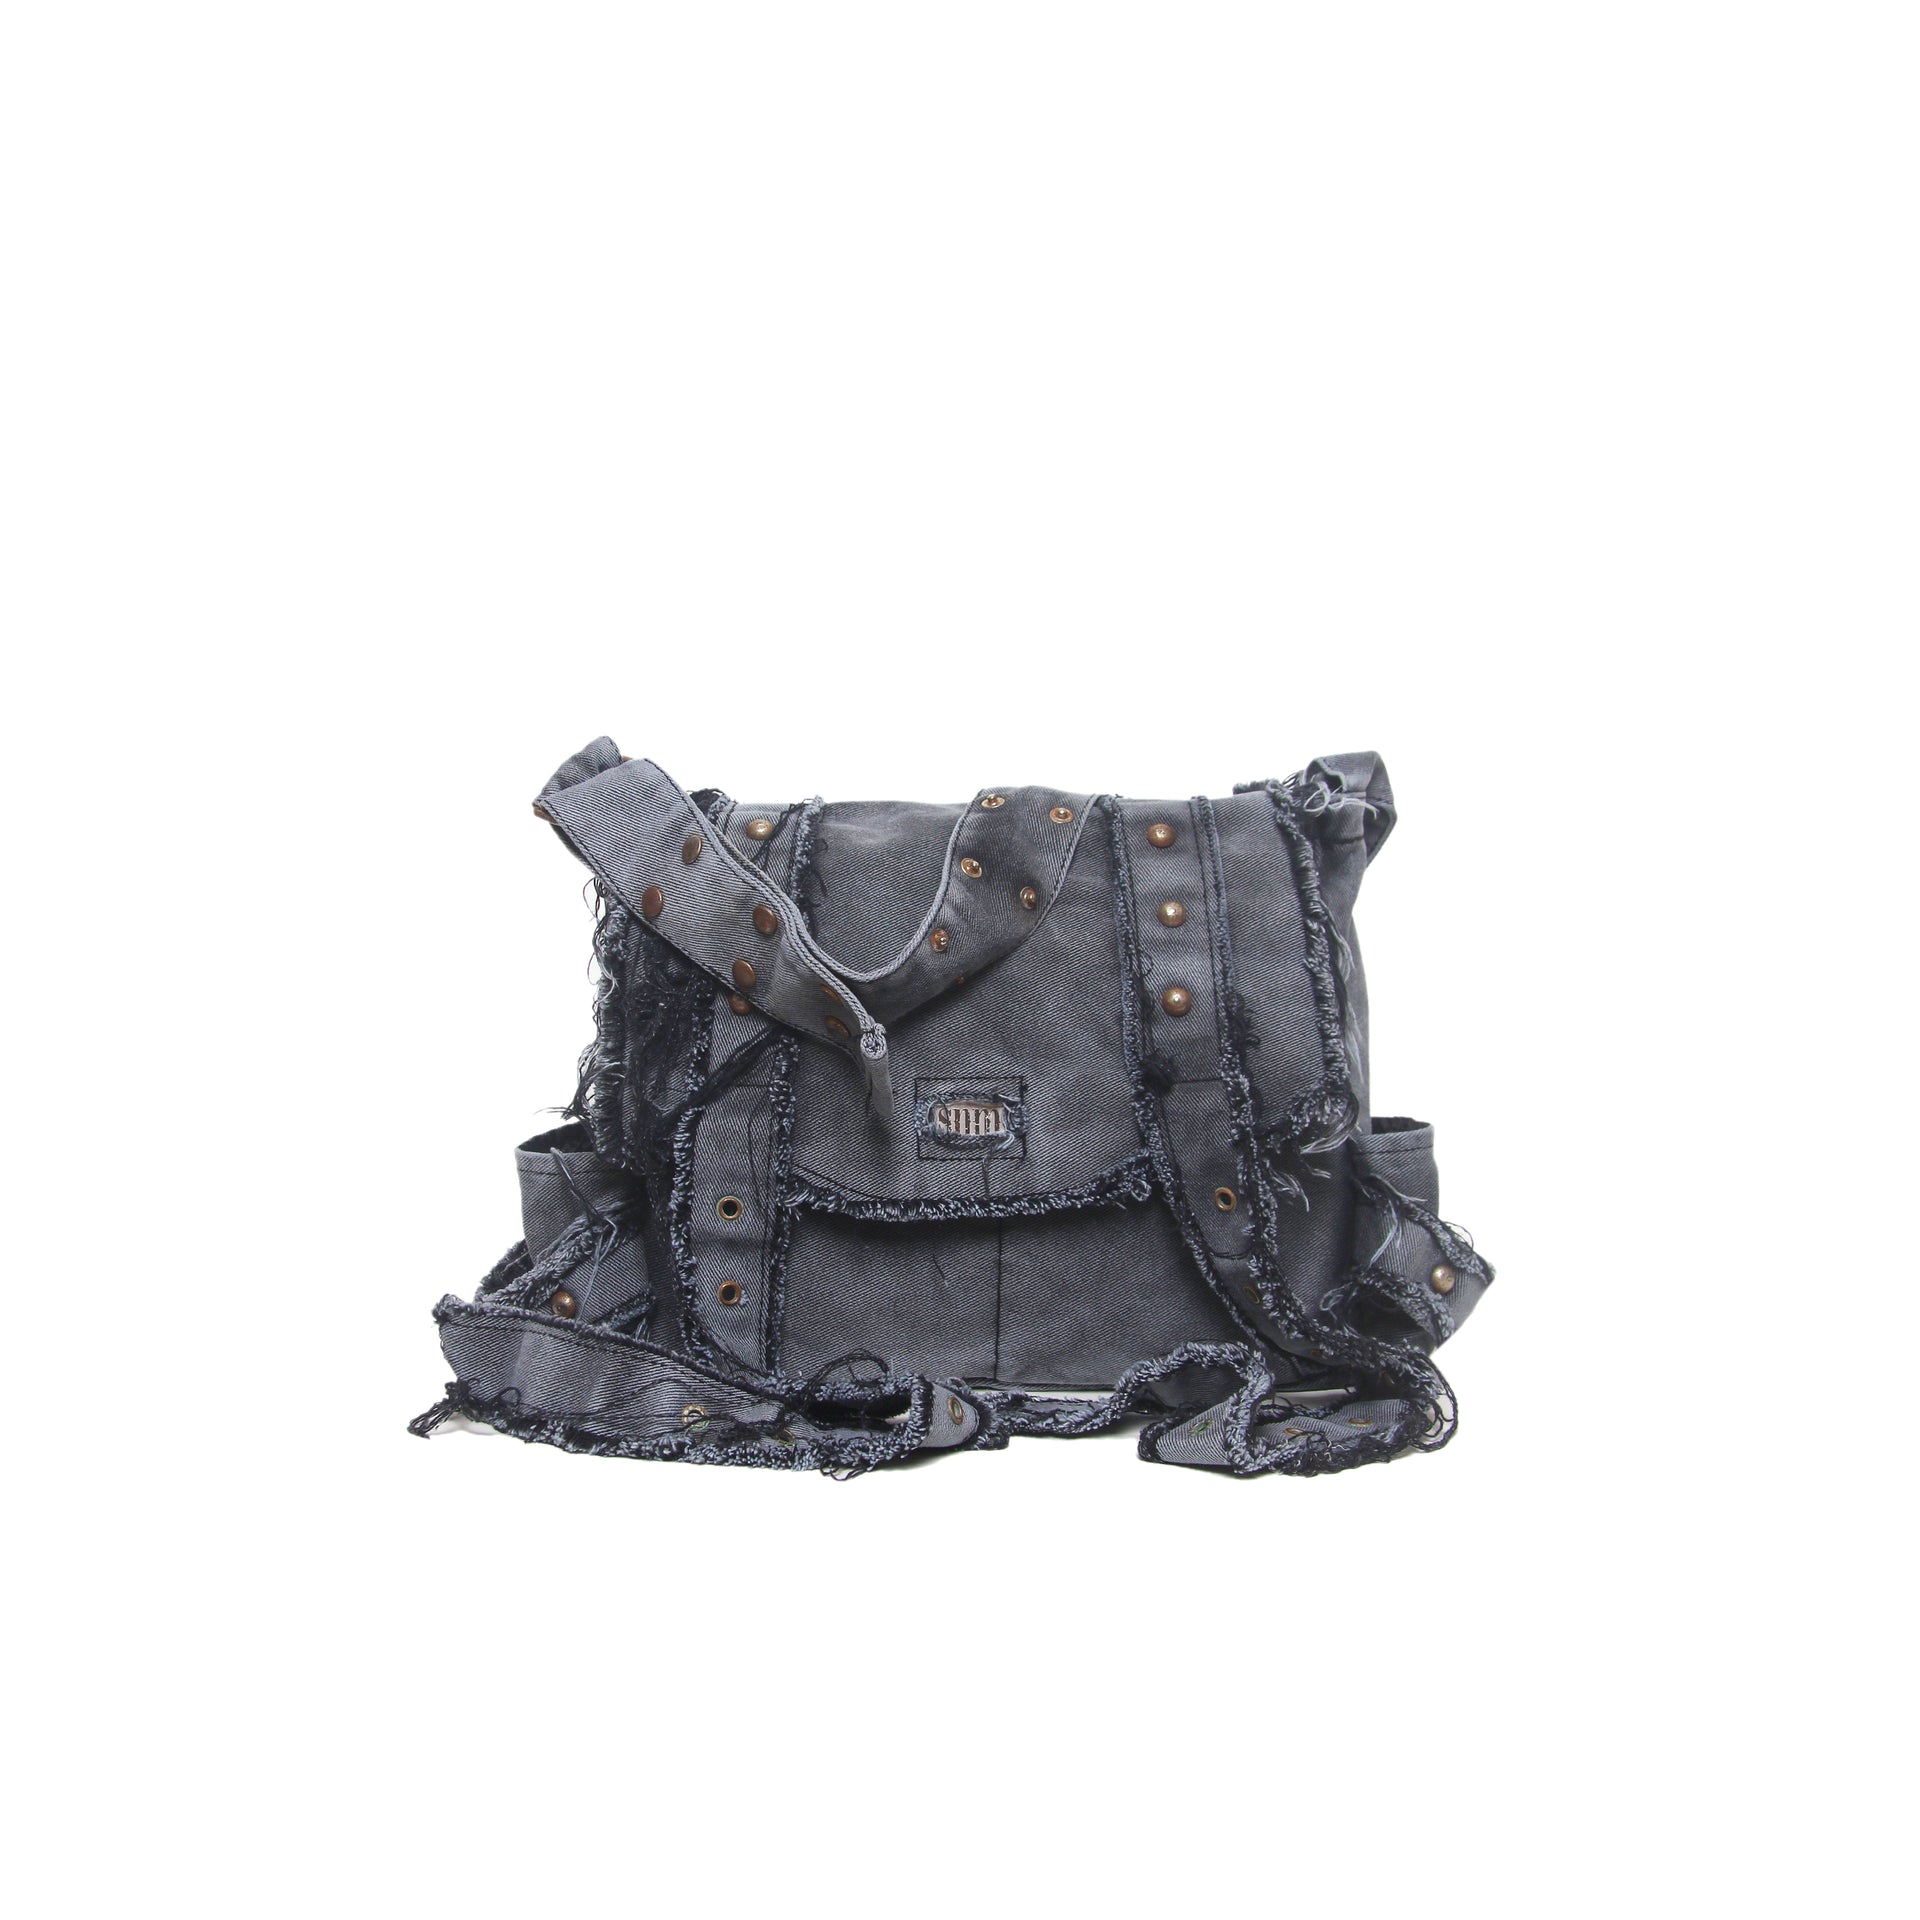 S-Washed Denim Bag - Cement